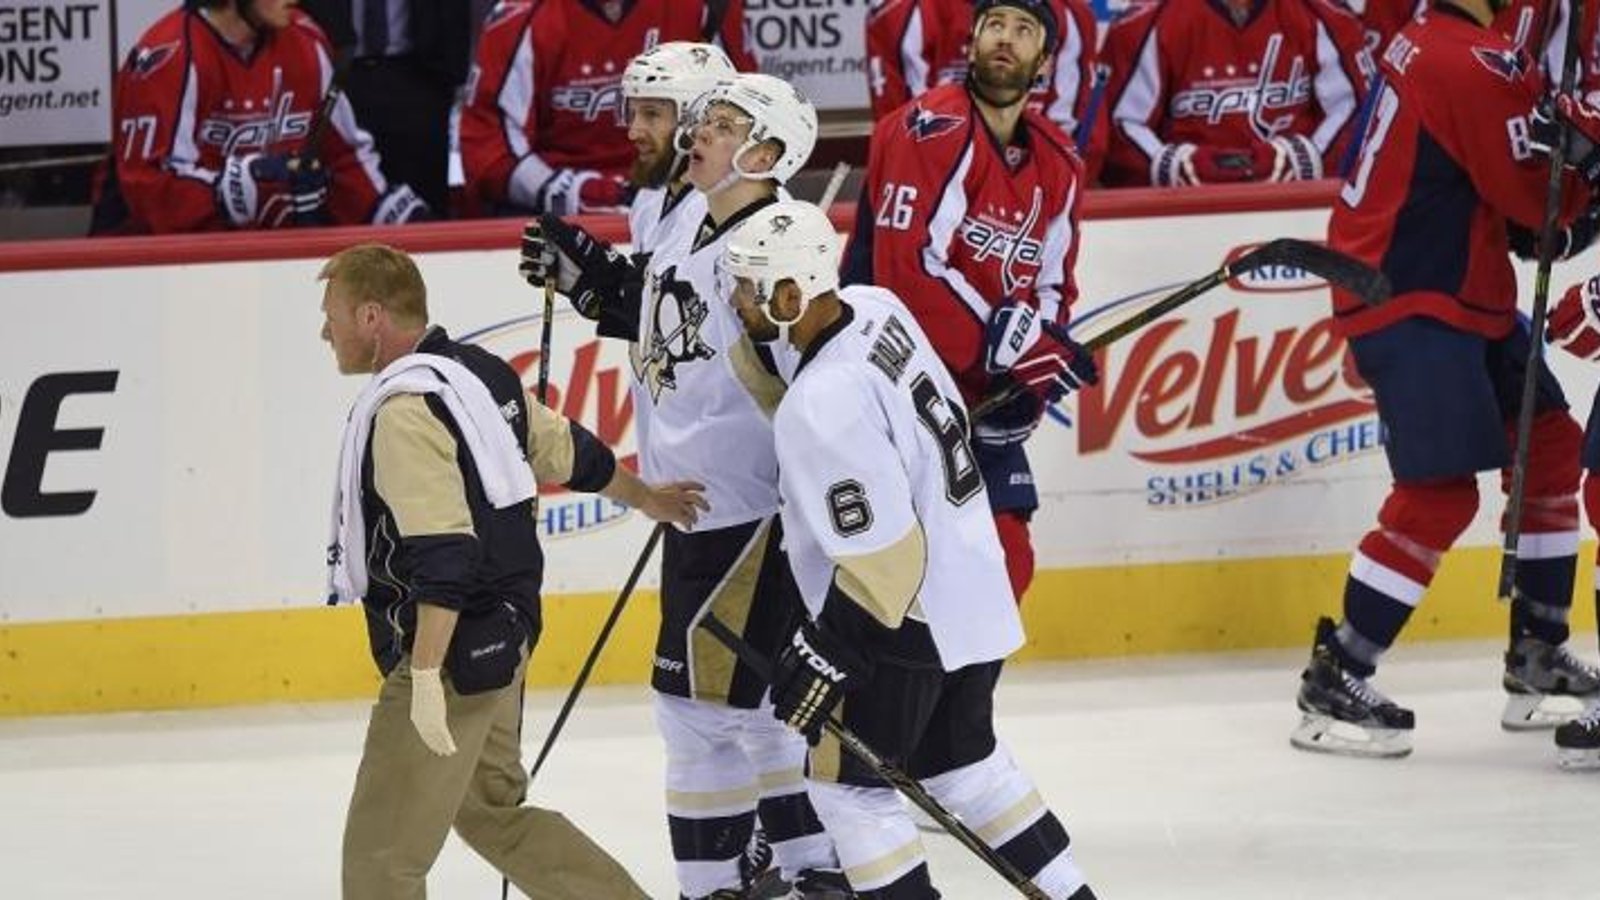 Orpik receives multi-game suspension for knock out hit on Maatta.